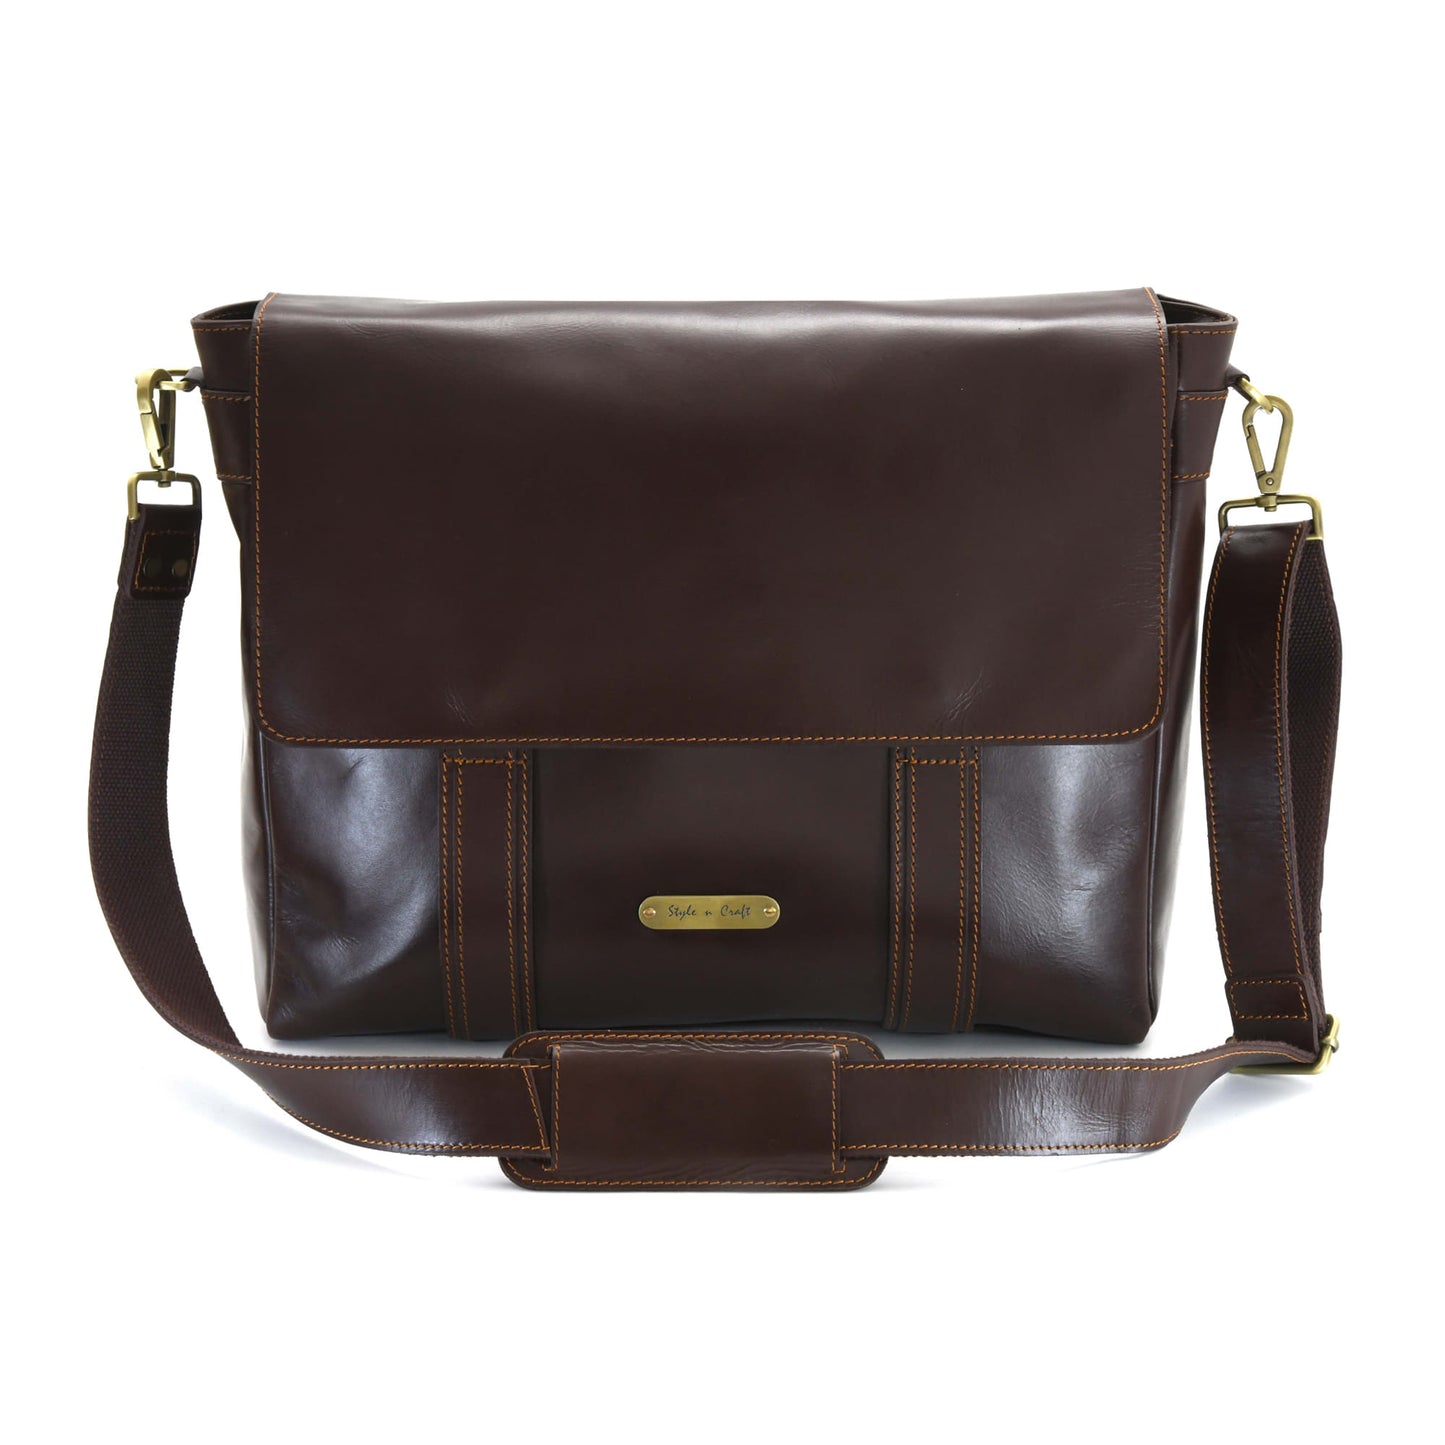 Style n Craft 392005 Messenger Bag in Full Grain Dark Brown Leather - Front View